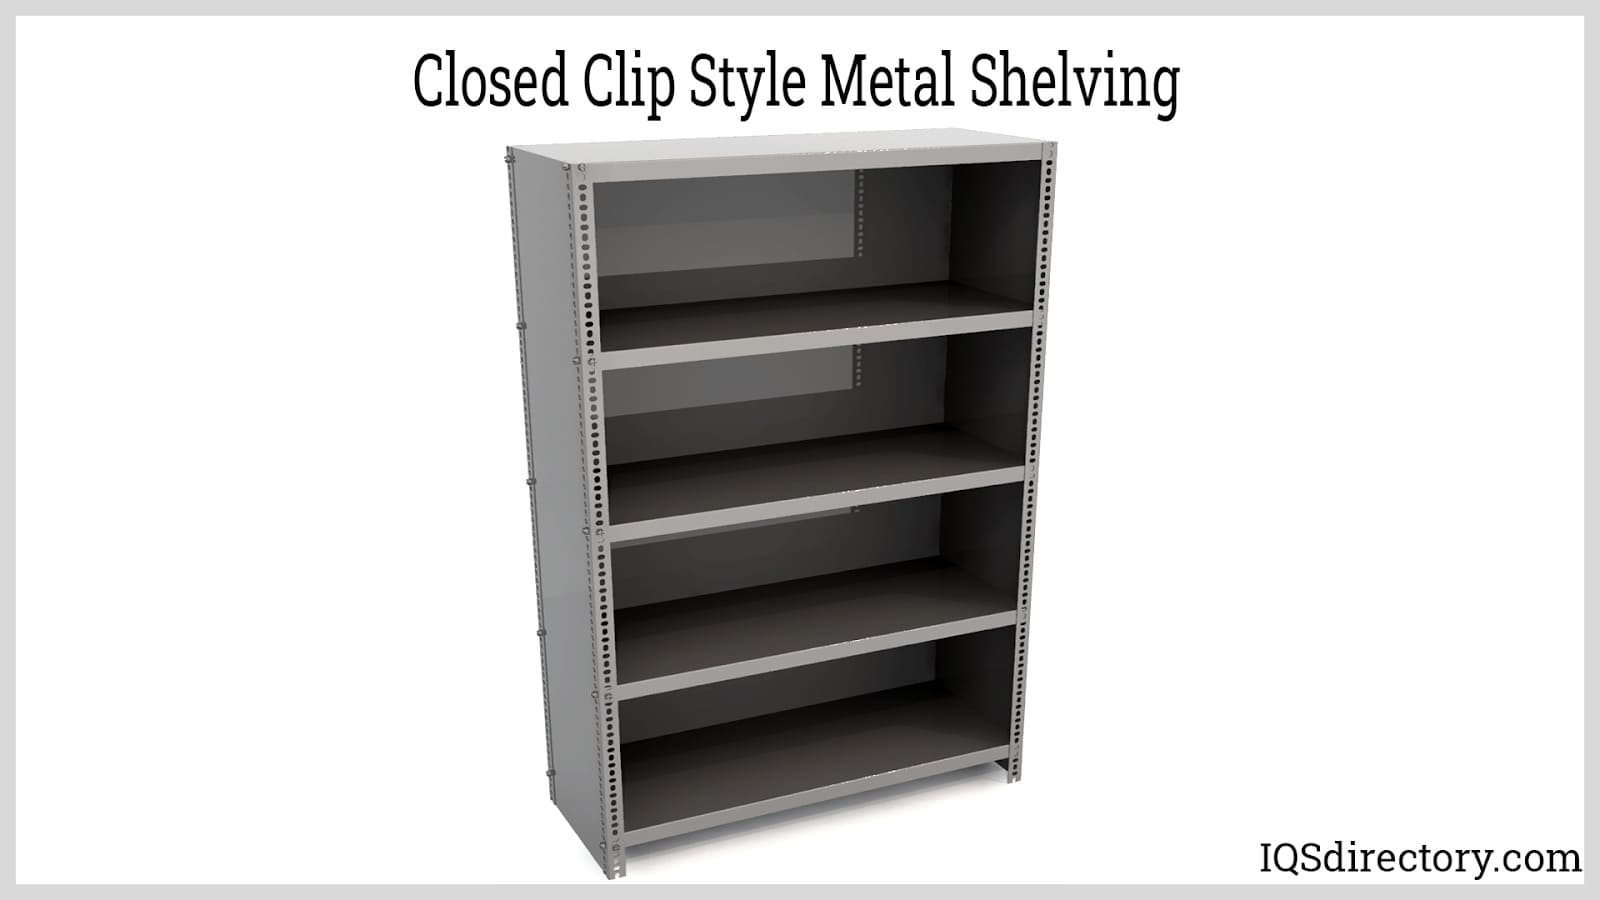 Closed Clip Style Metal Shelving